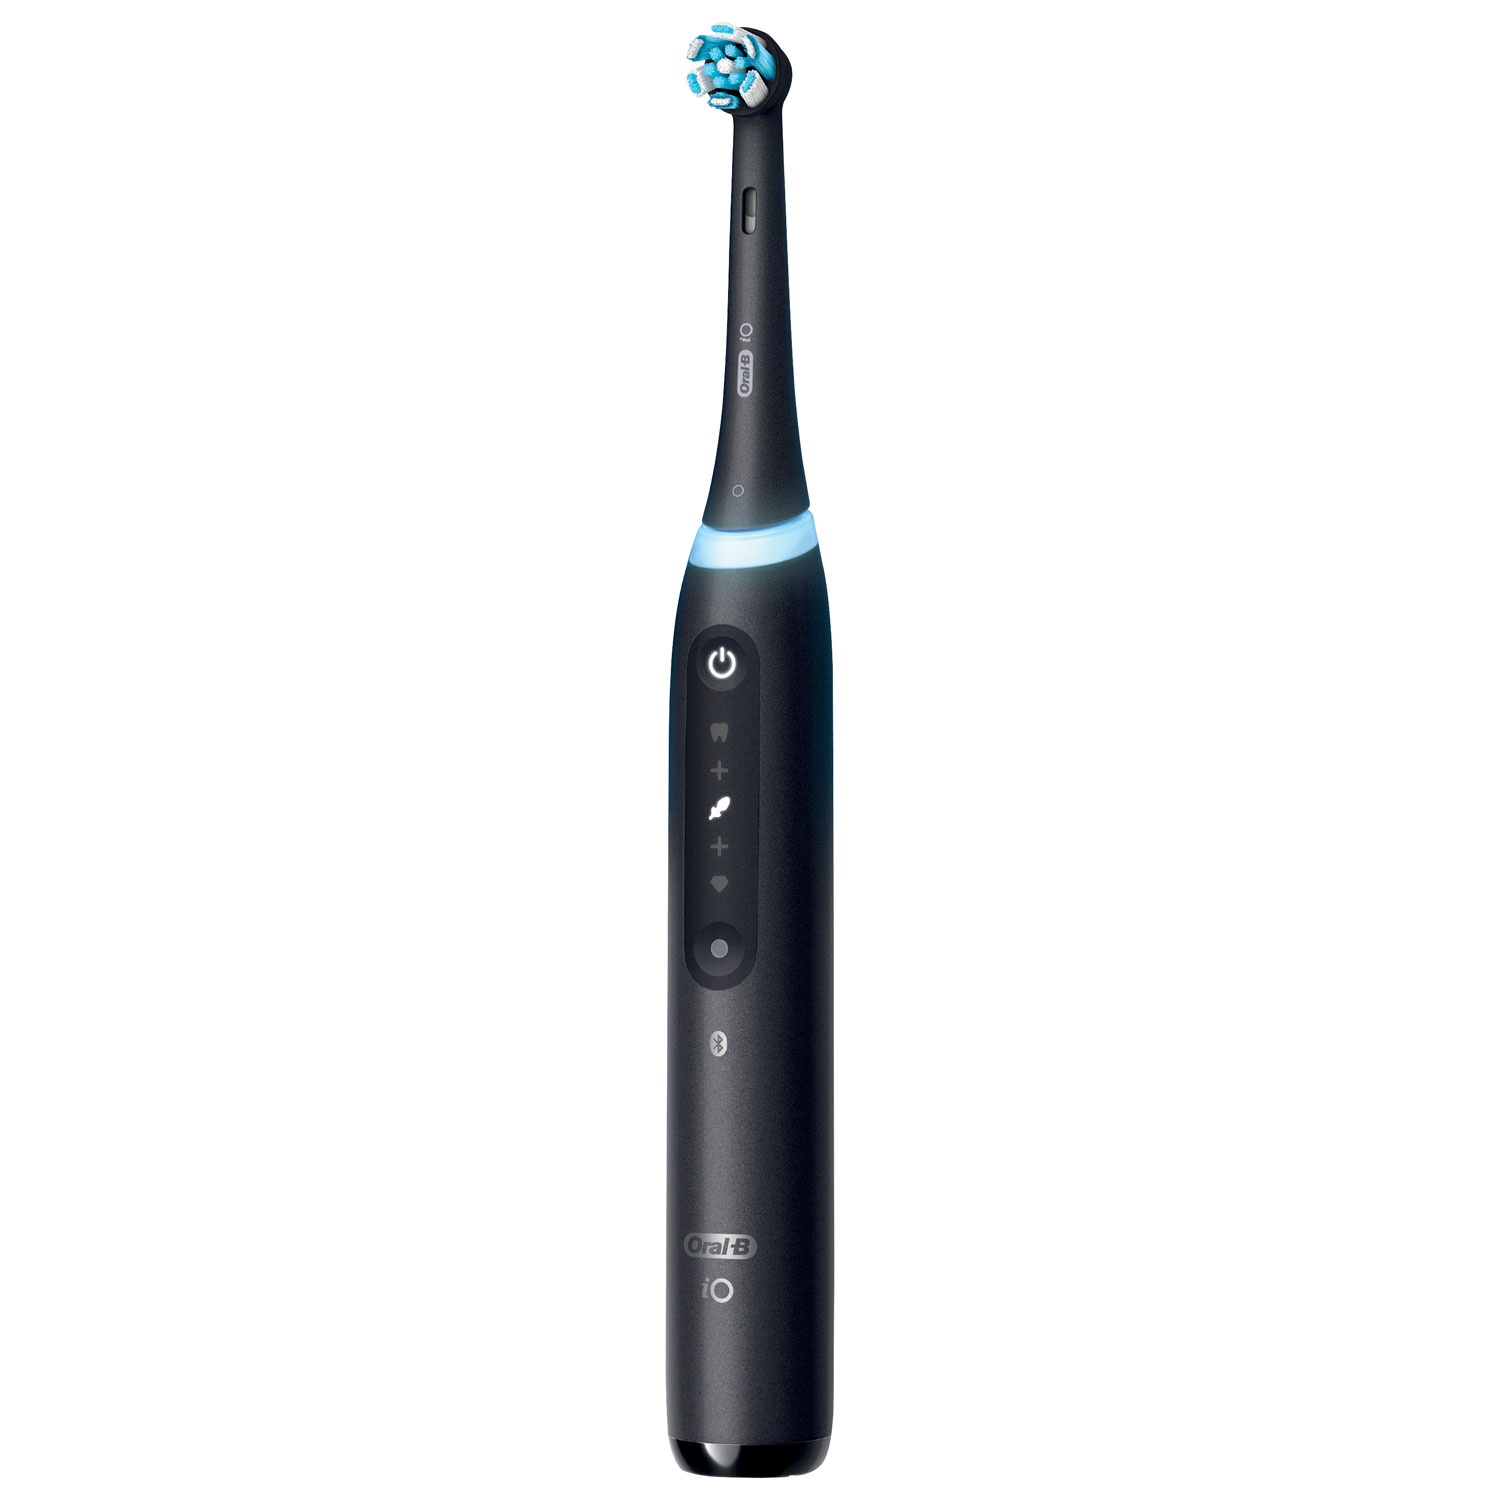 Oral-B iO Series 5 Rechargeable Electric Toothbrush - Black